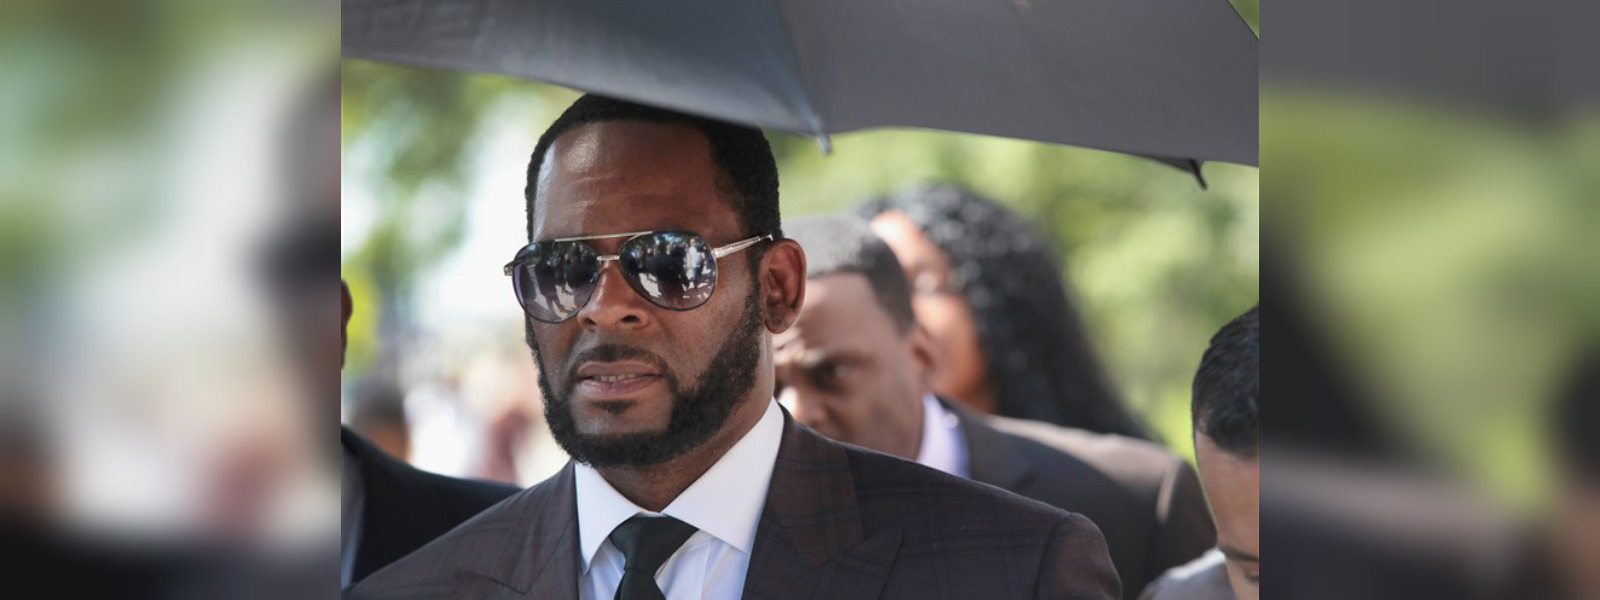 R. Kelly arrested on federal sex crime charges